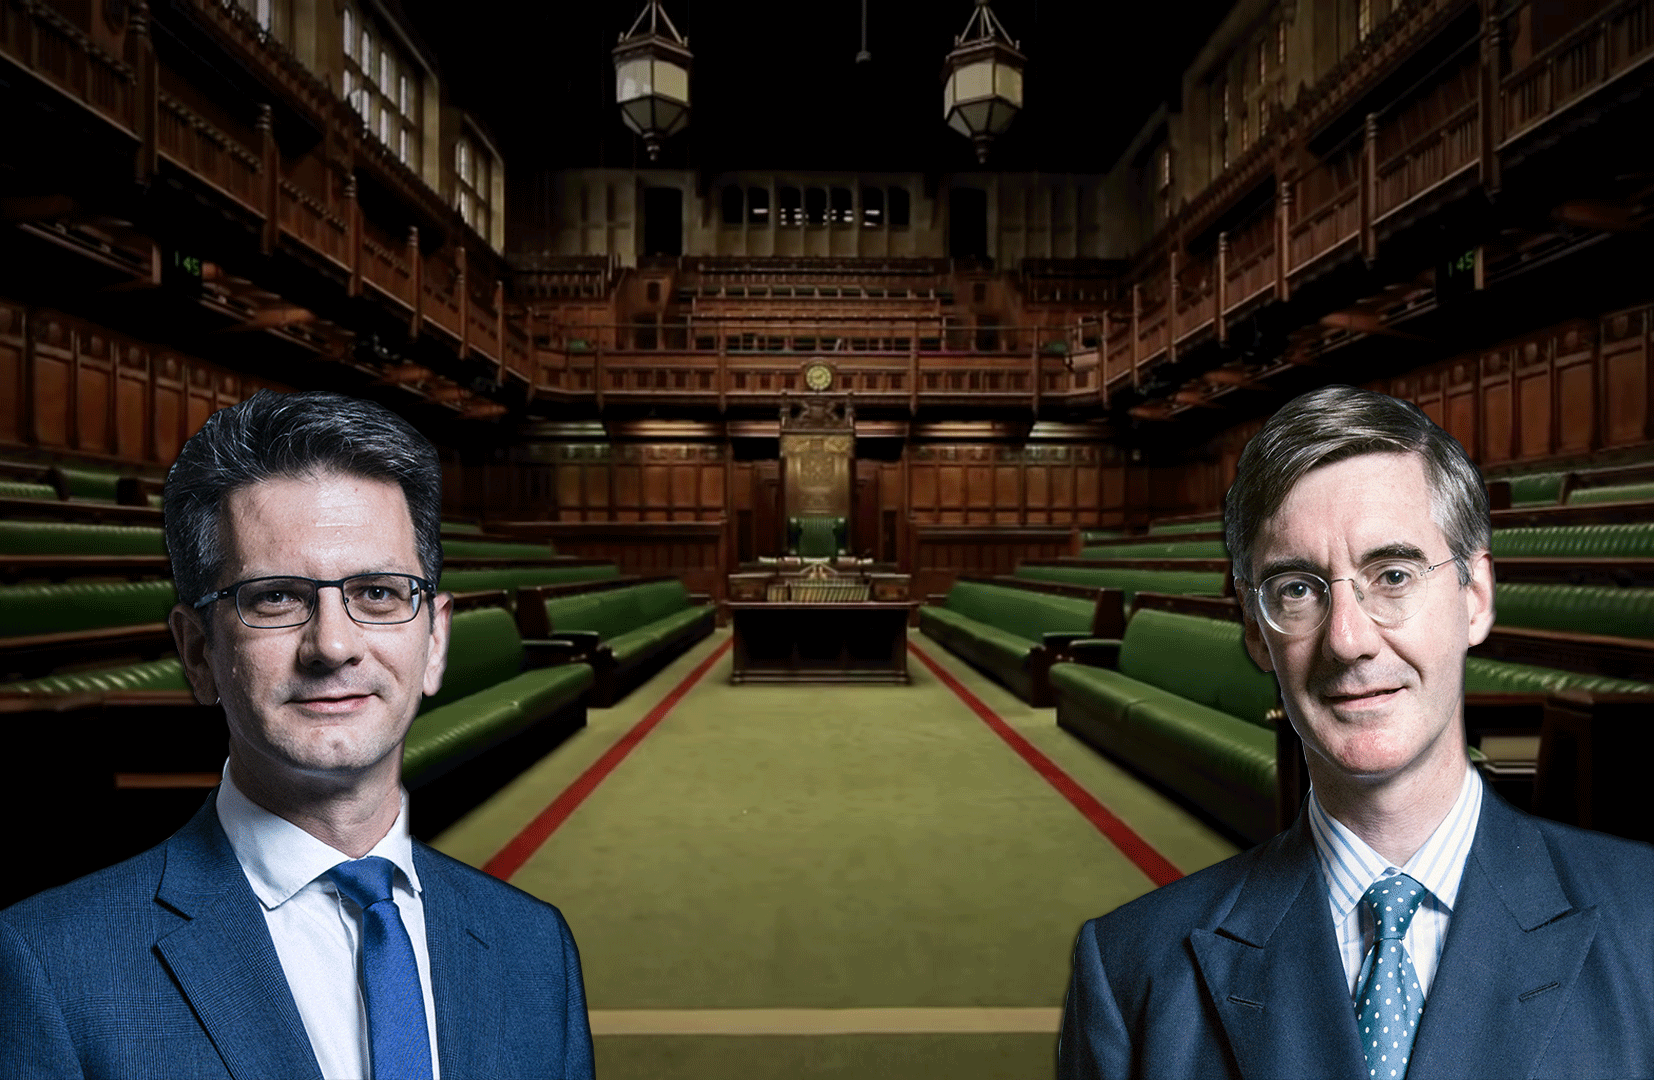 Brexit minister apologises for entertaining Jacob Rees-Mogg conspiracy theory on Brexit data